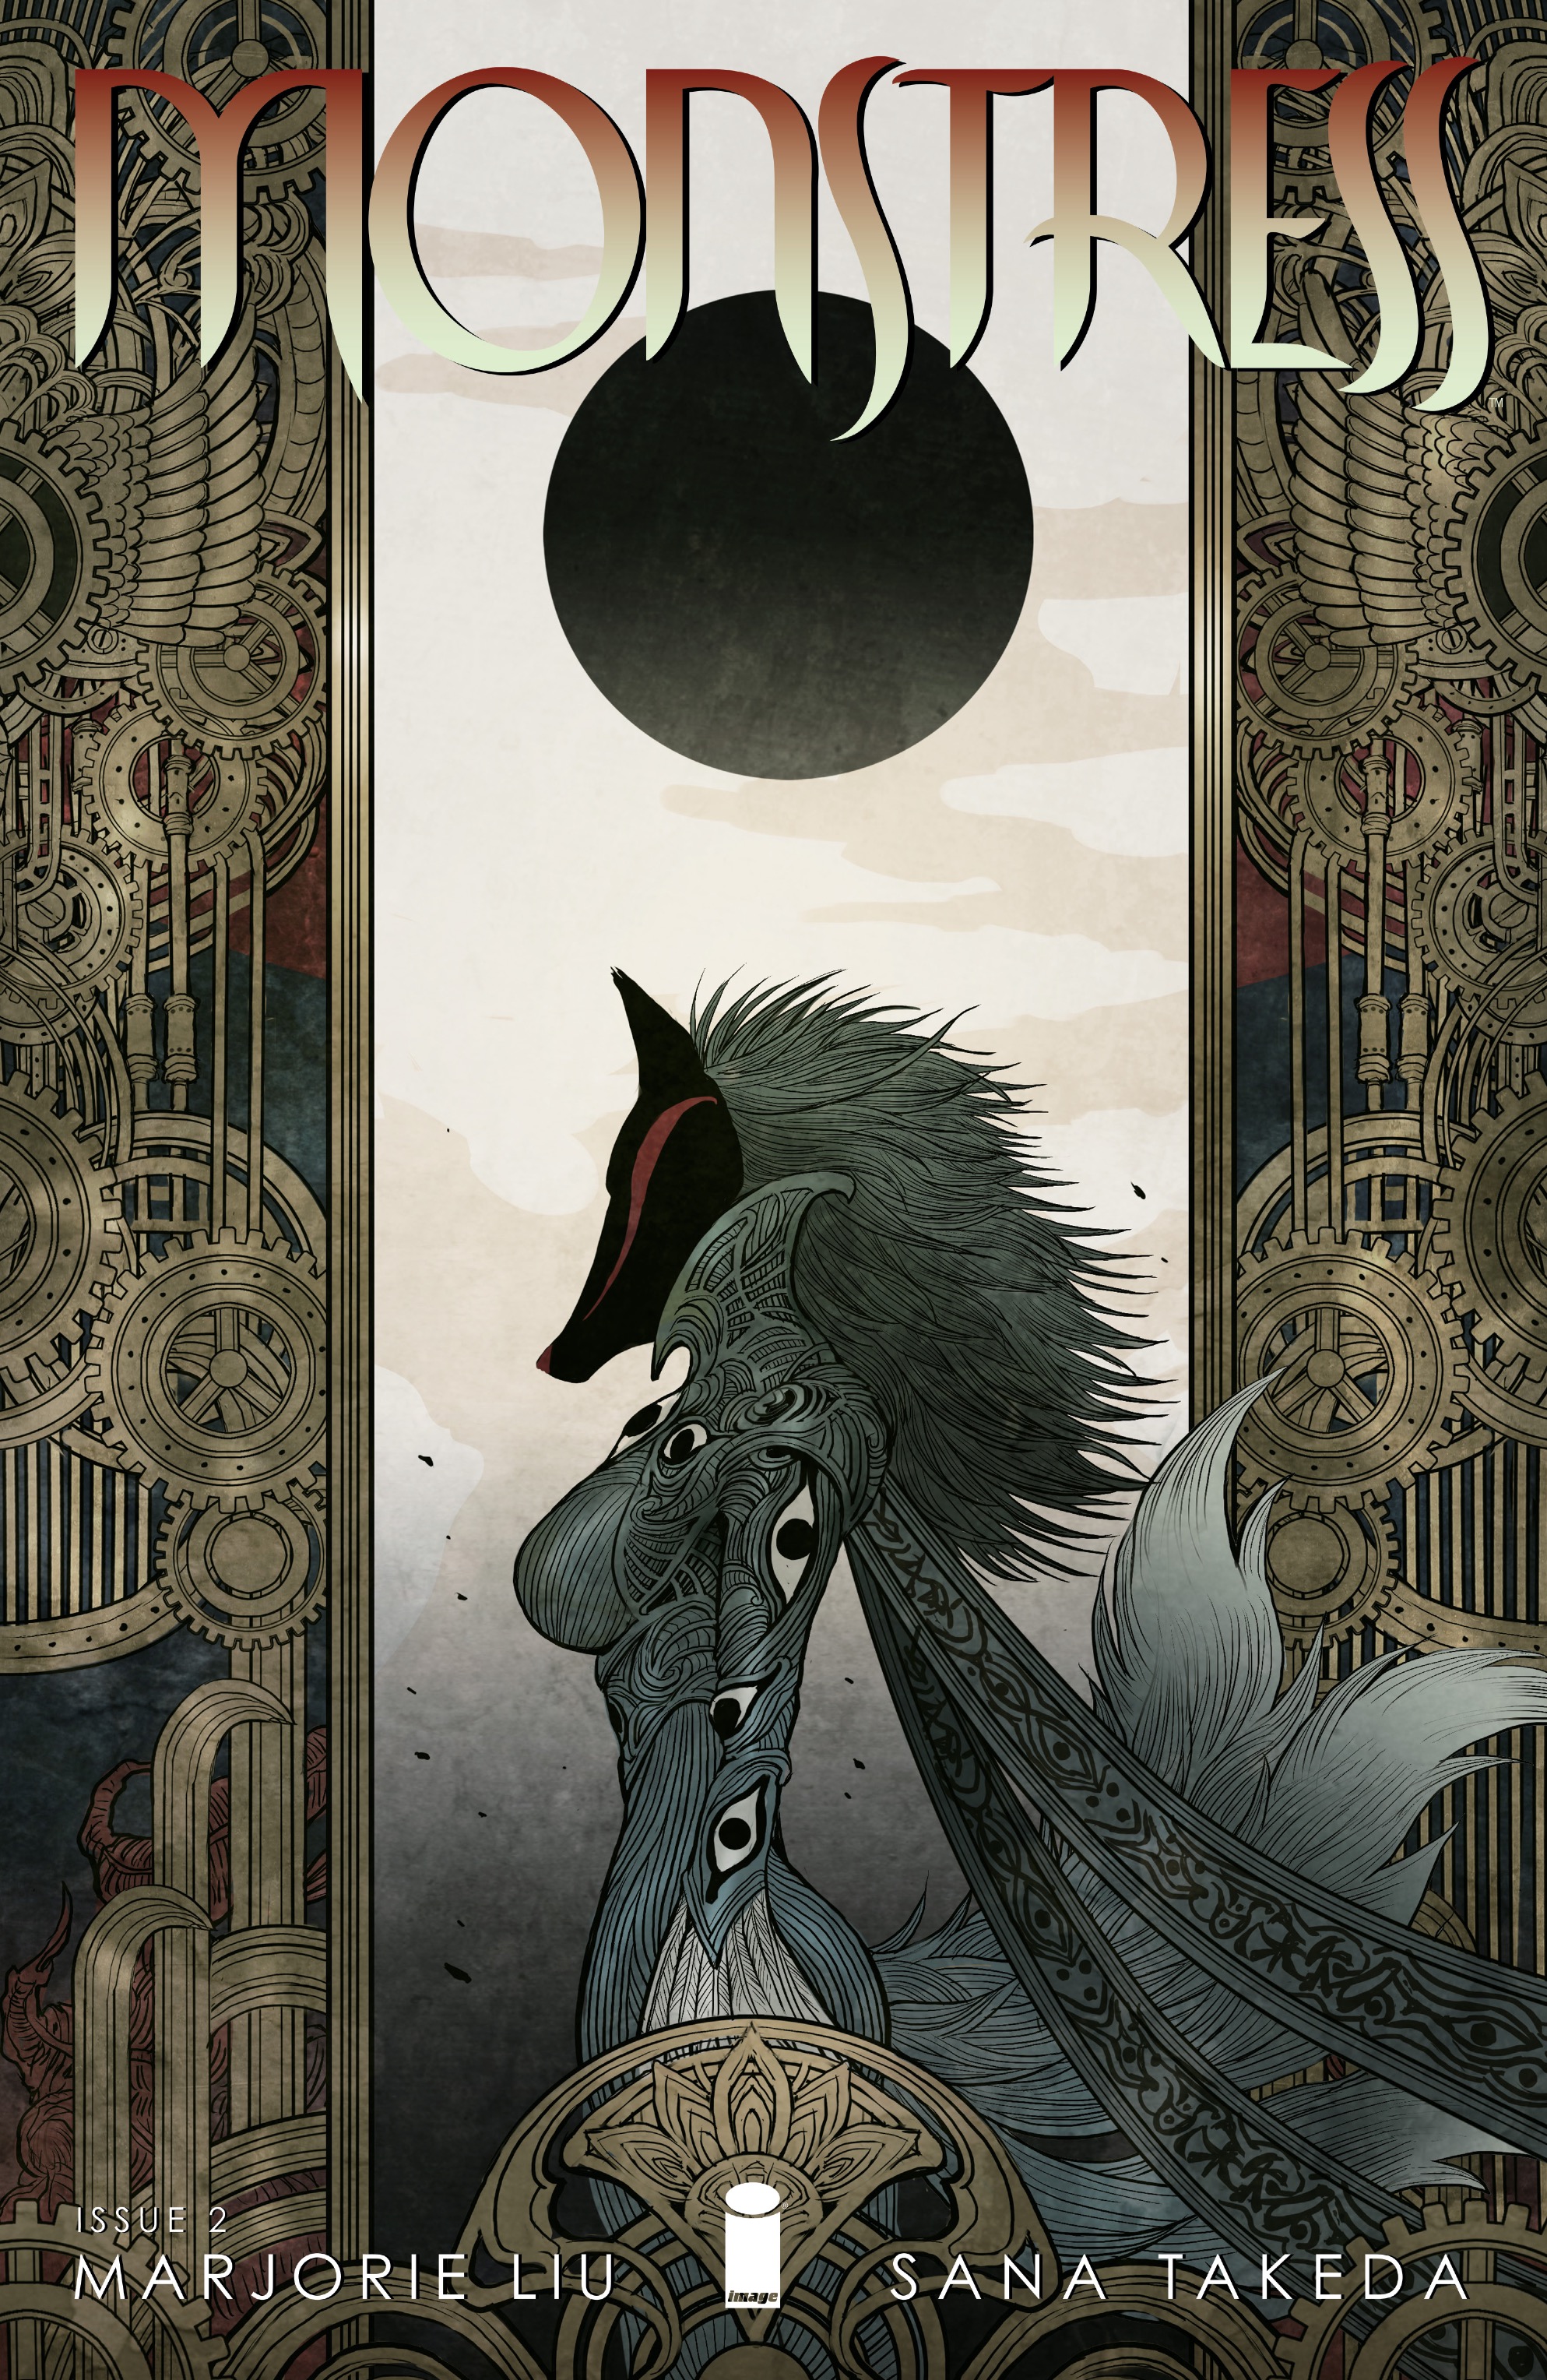 Read online Monstress comic -  Issue #2 - 1